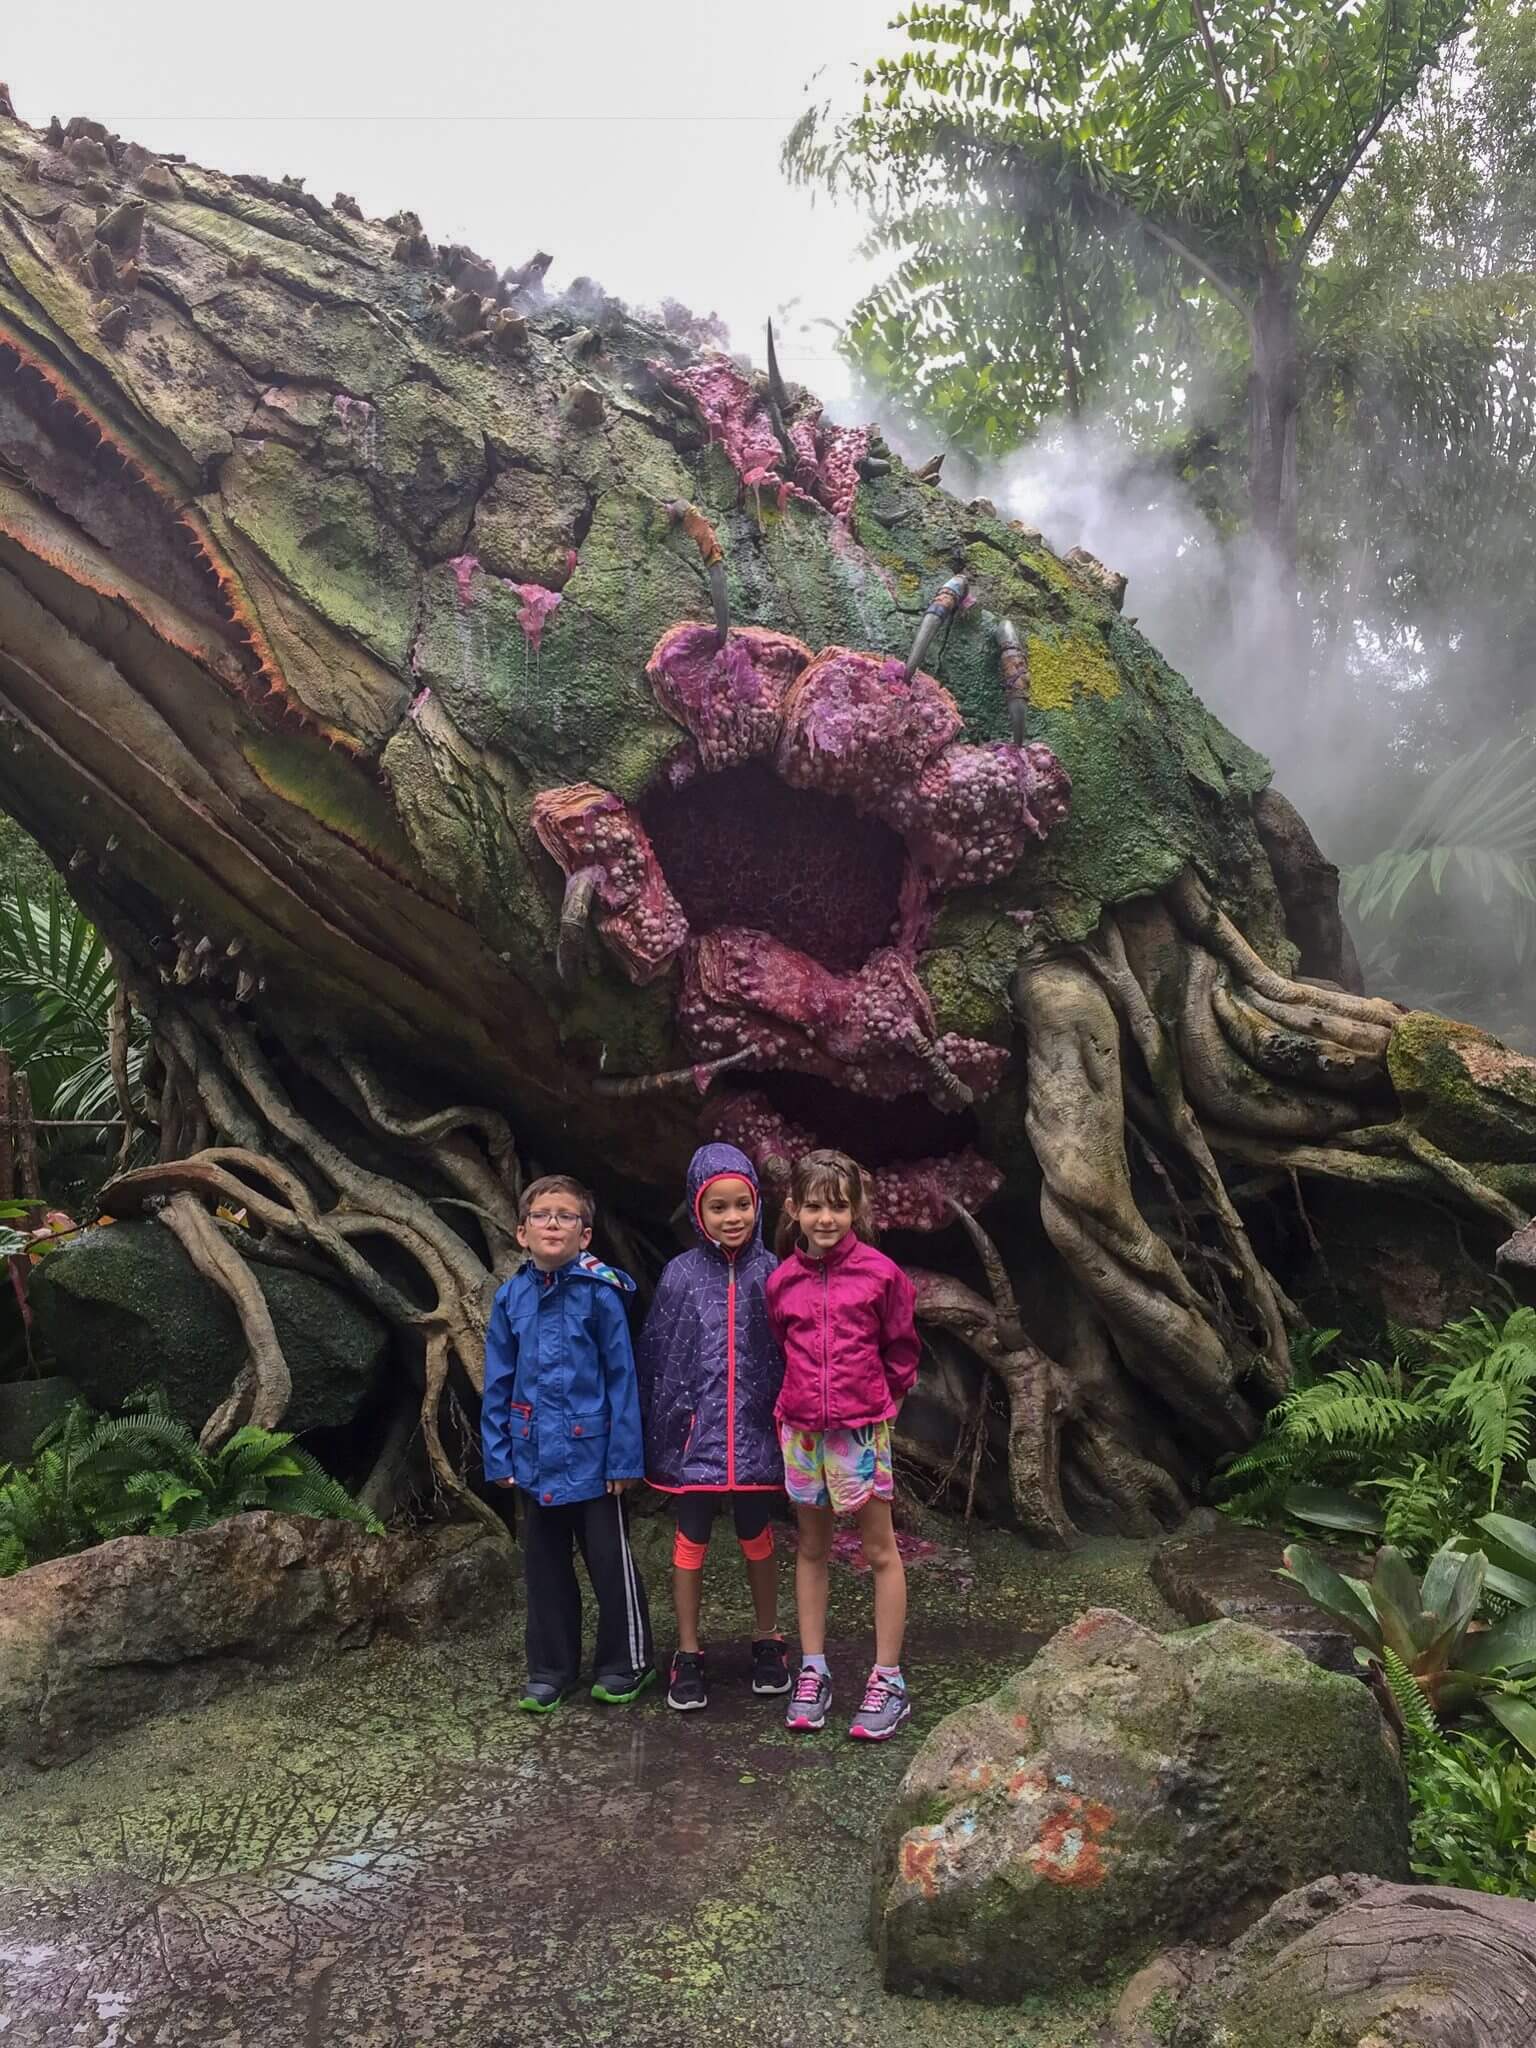 Traveling with Extended Family to Pandora. Tips for keeping the Peace while on vacation to Disney. www.HuntingforRubies.com